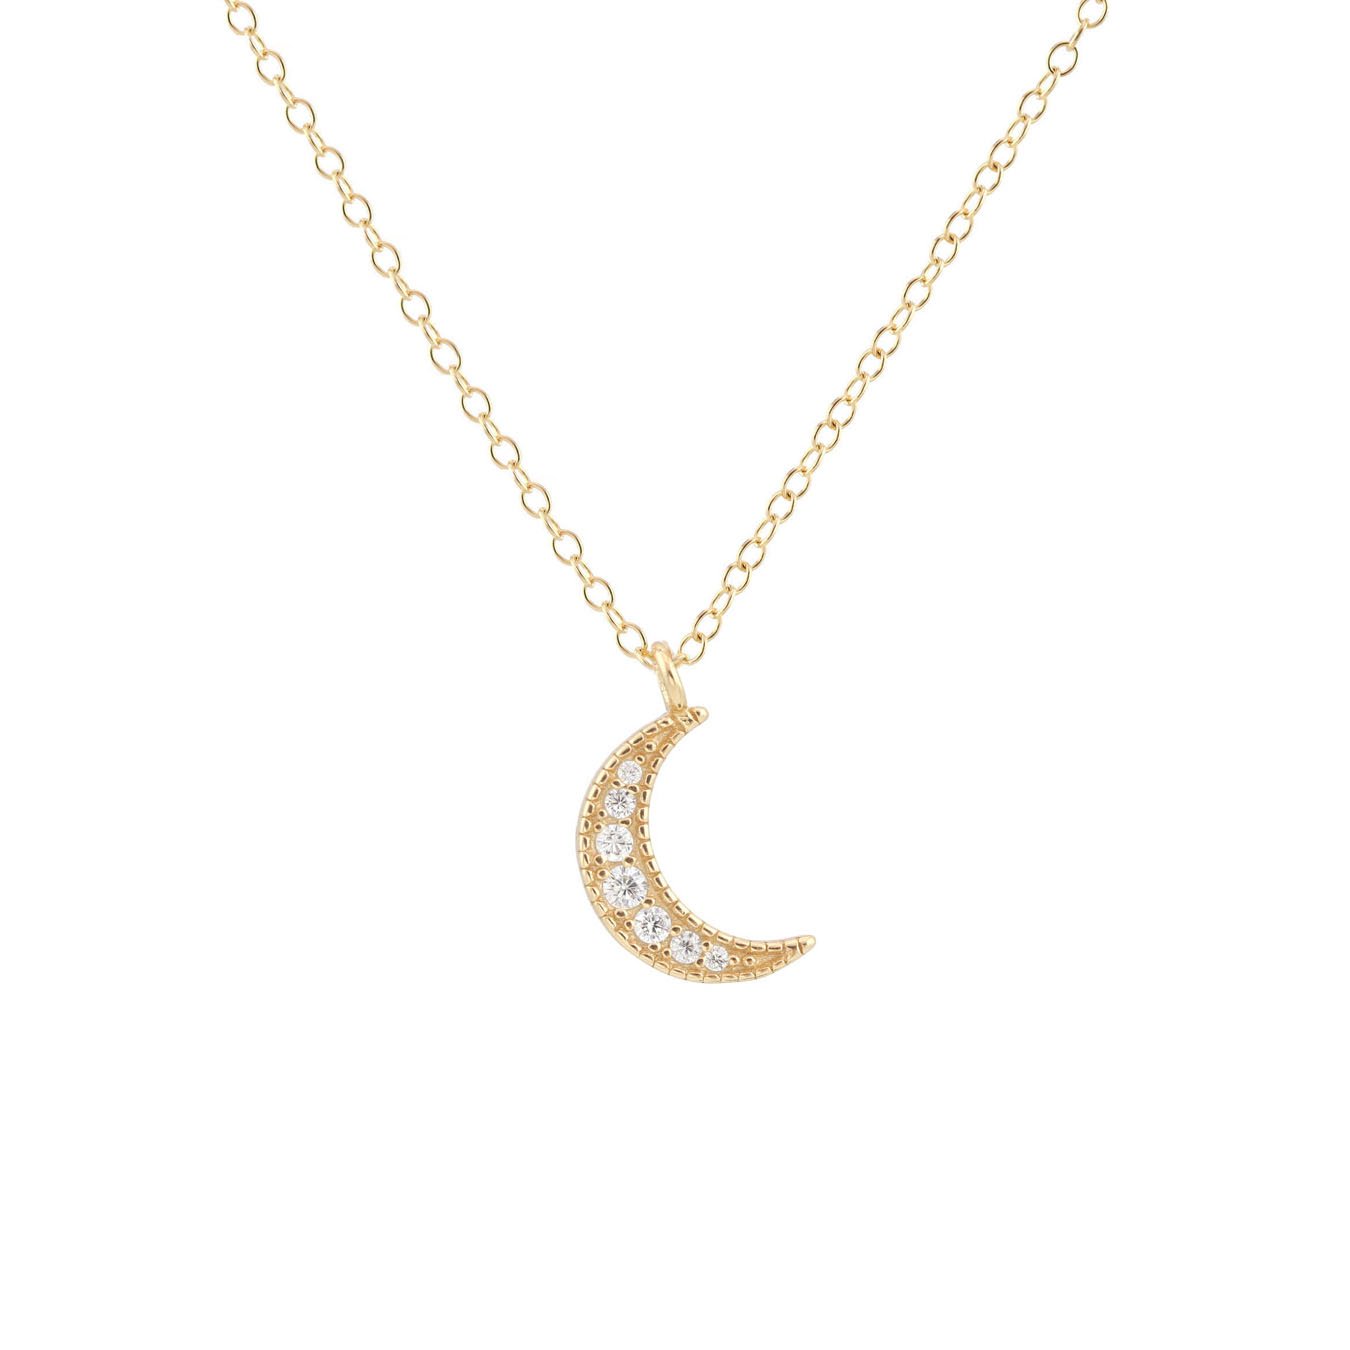 Crescent Moon Crystal Charm Necklace